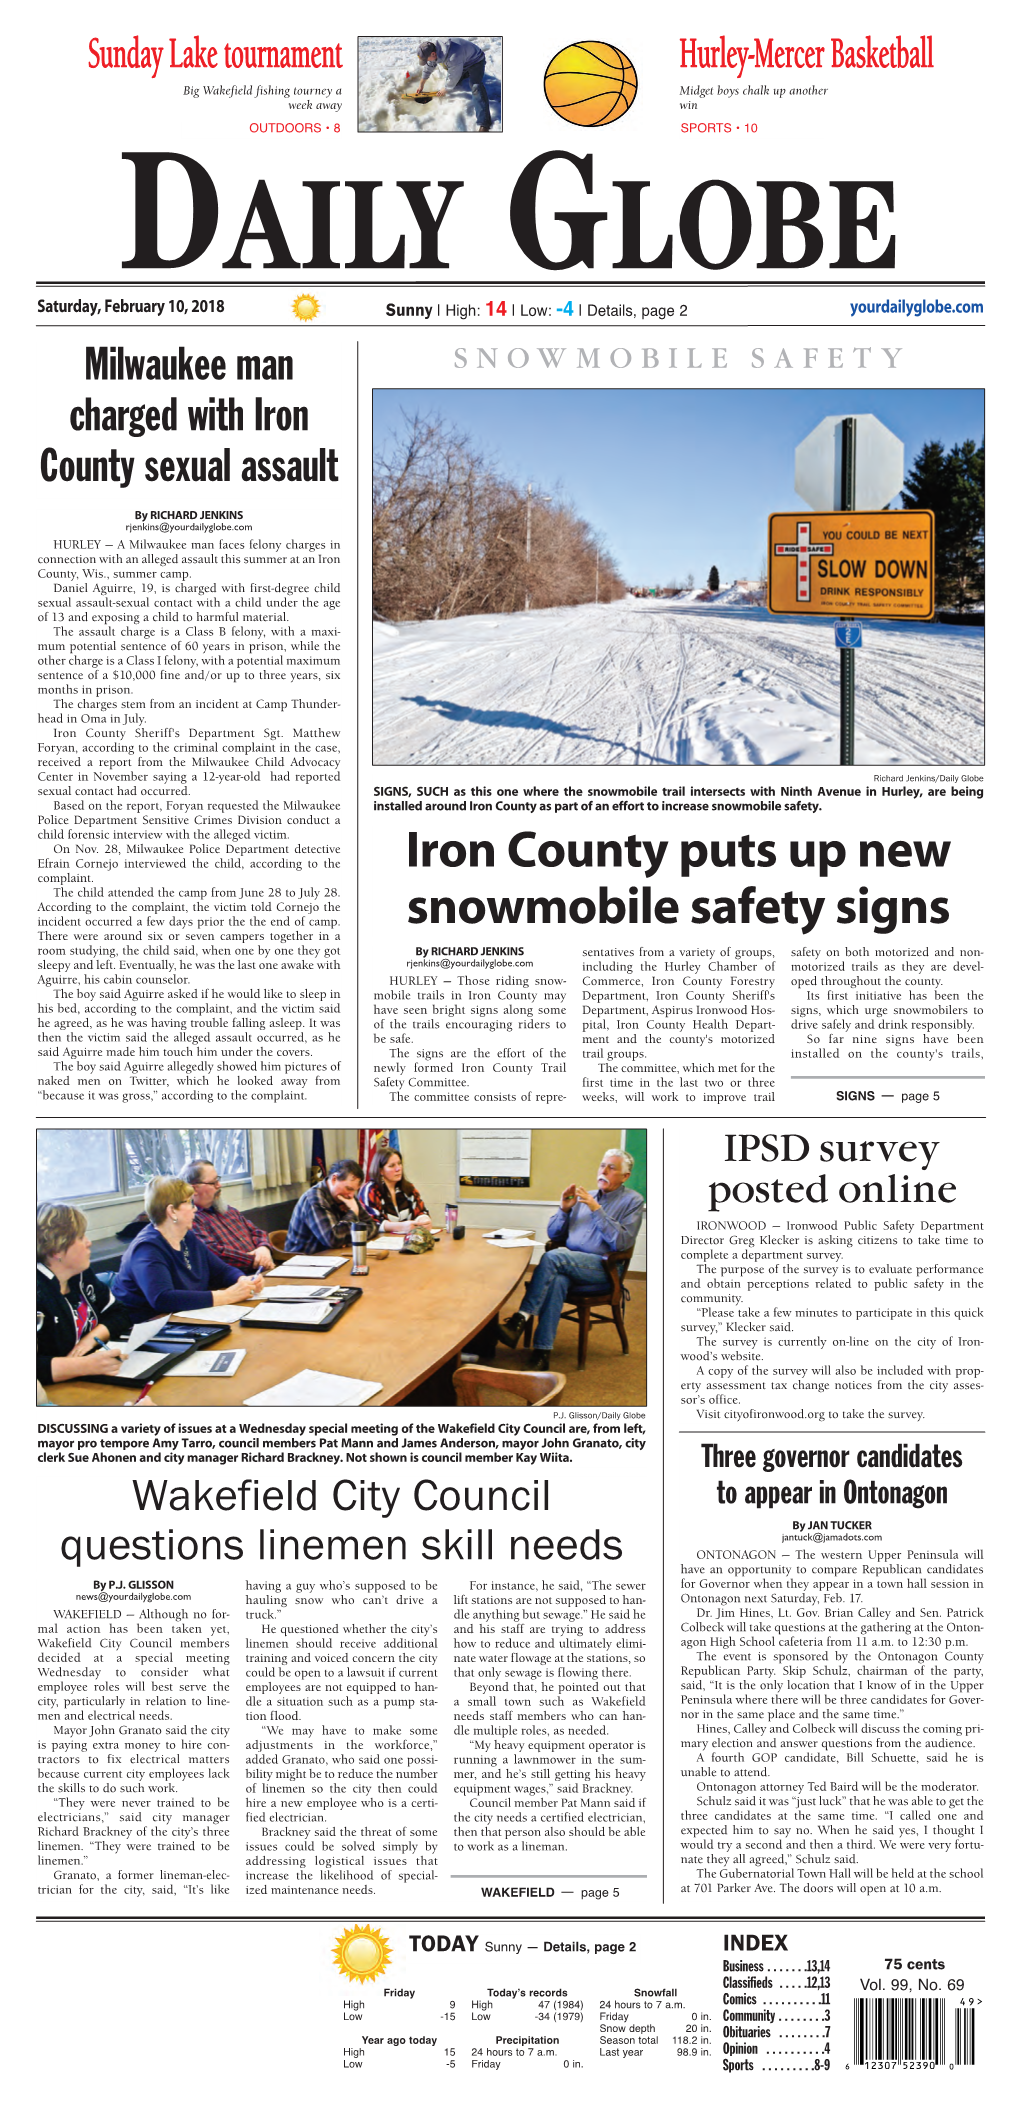 Iron County Puts up New Snowmobile Safety Signs